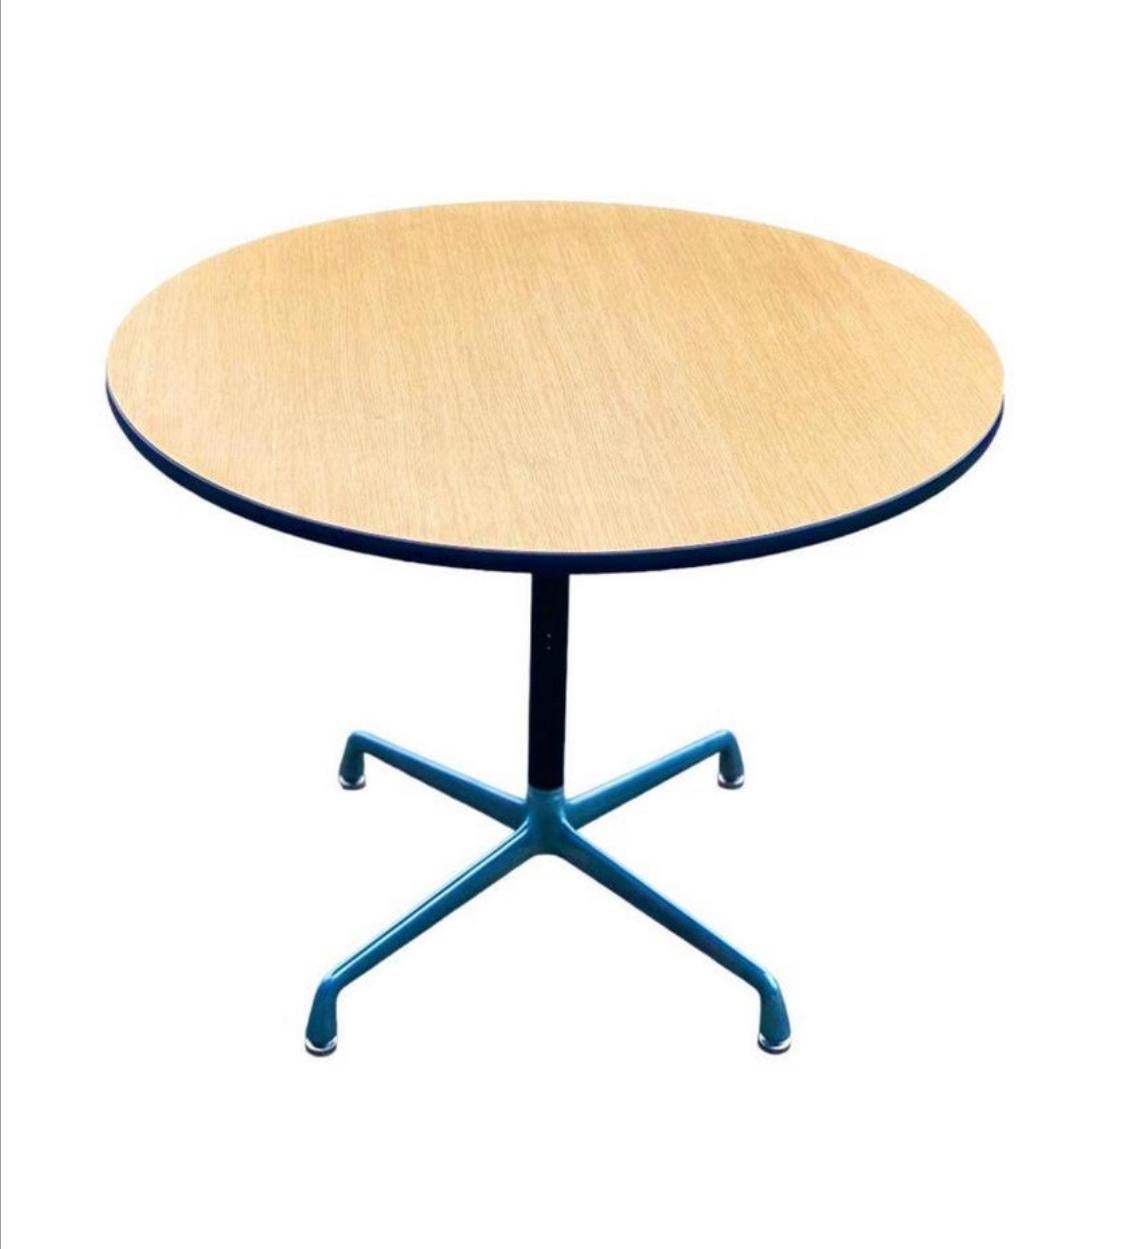 American Herman Miller Eames 36” Dining Table For Sale